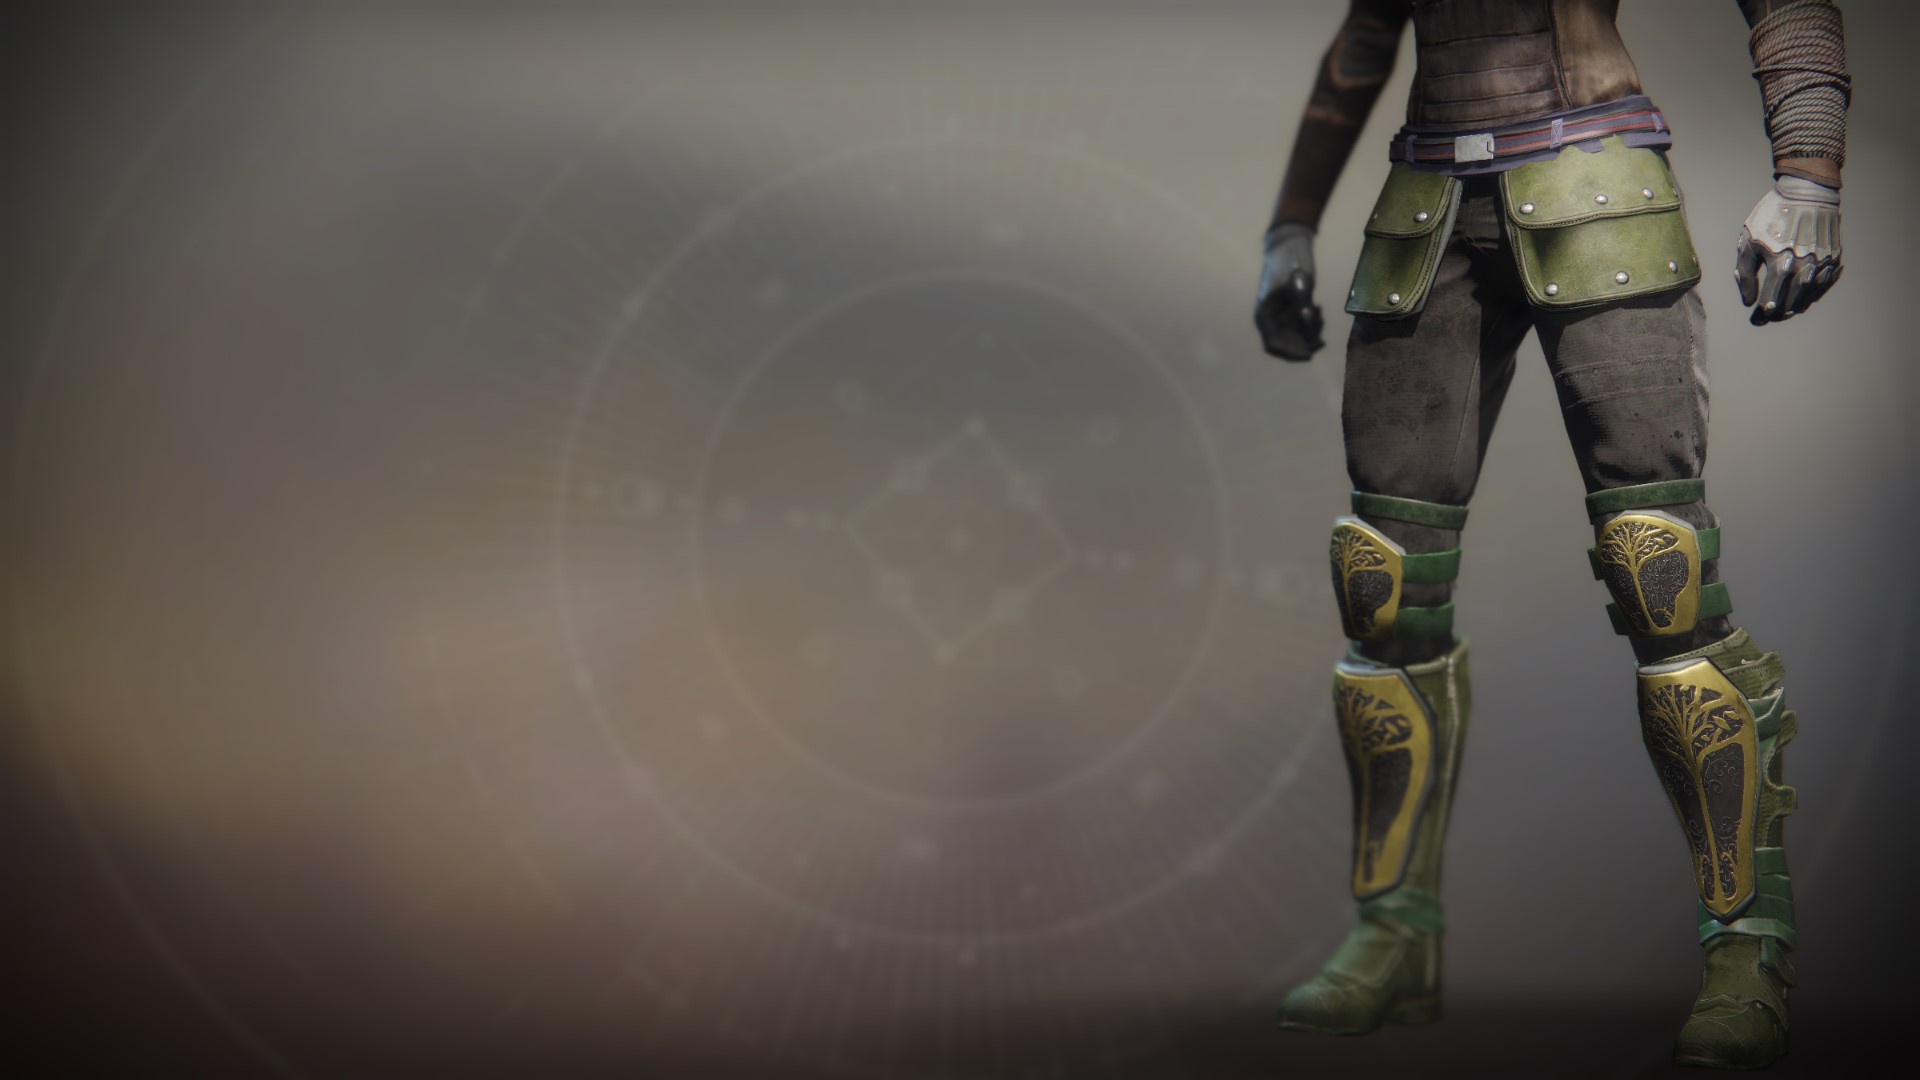 An in-game render of the Iron Truage Boots.